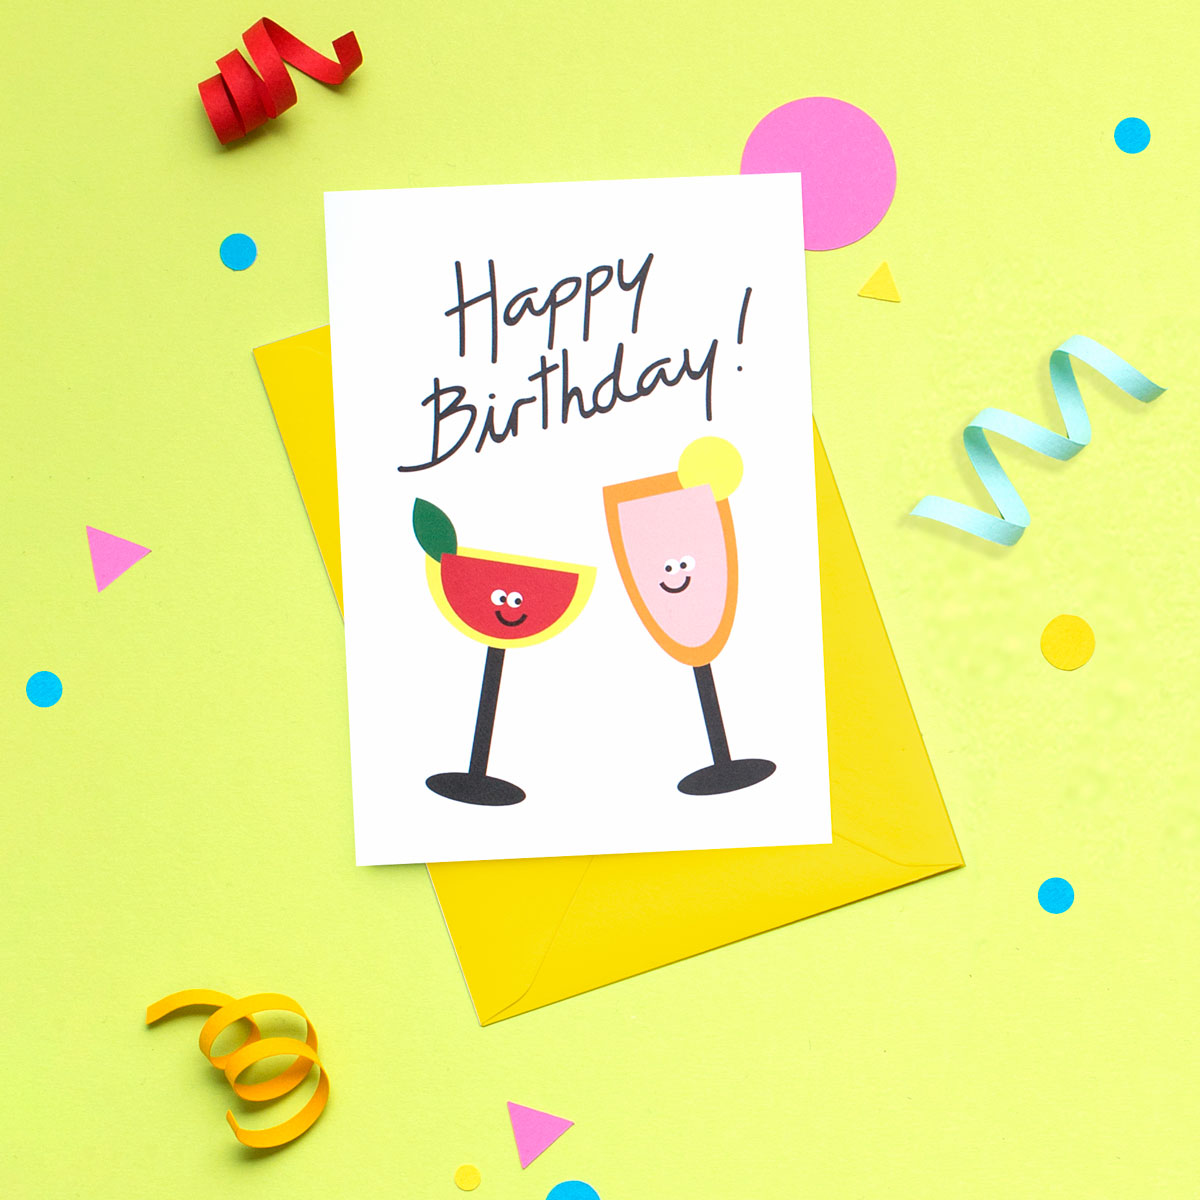 Funny Martini and Champagne Cocktails Happy Birthday Card - I AM A